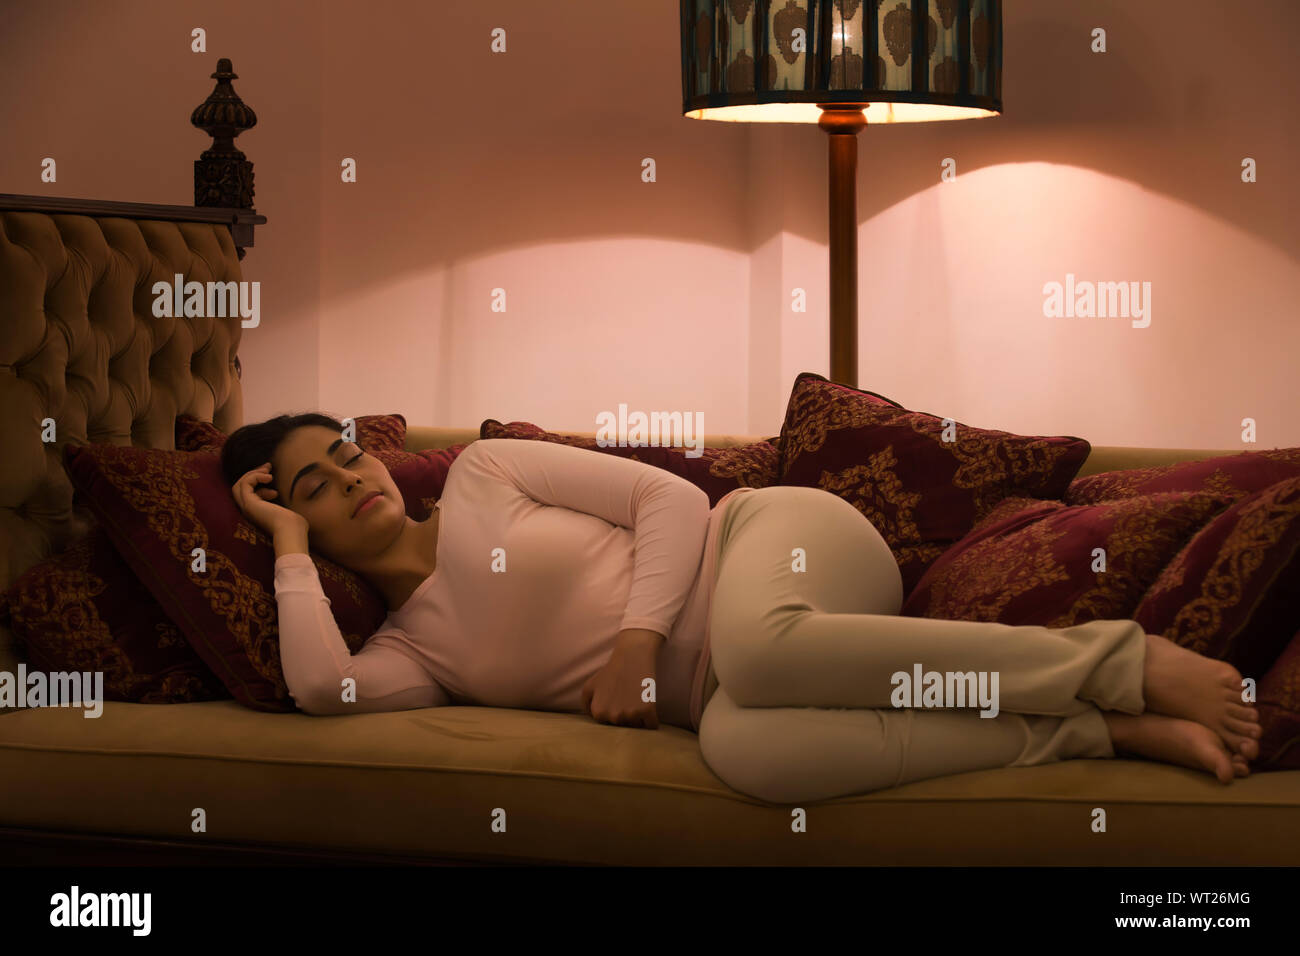 young woman sleeping on day bed Stock Photo